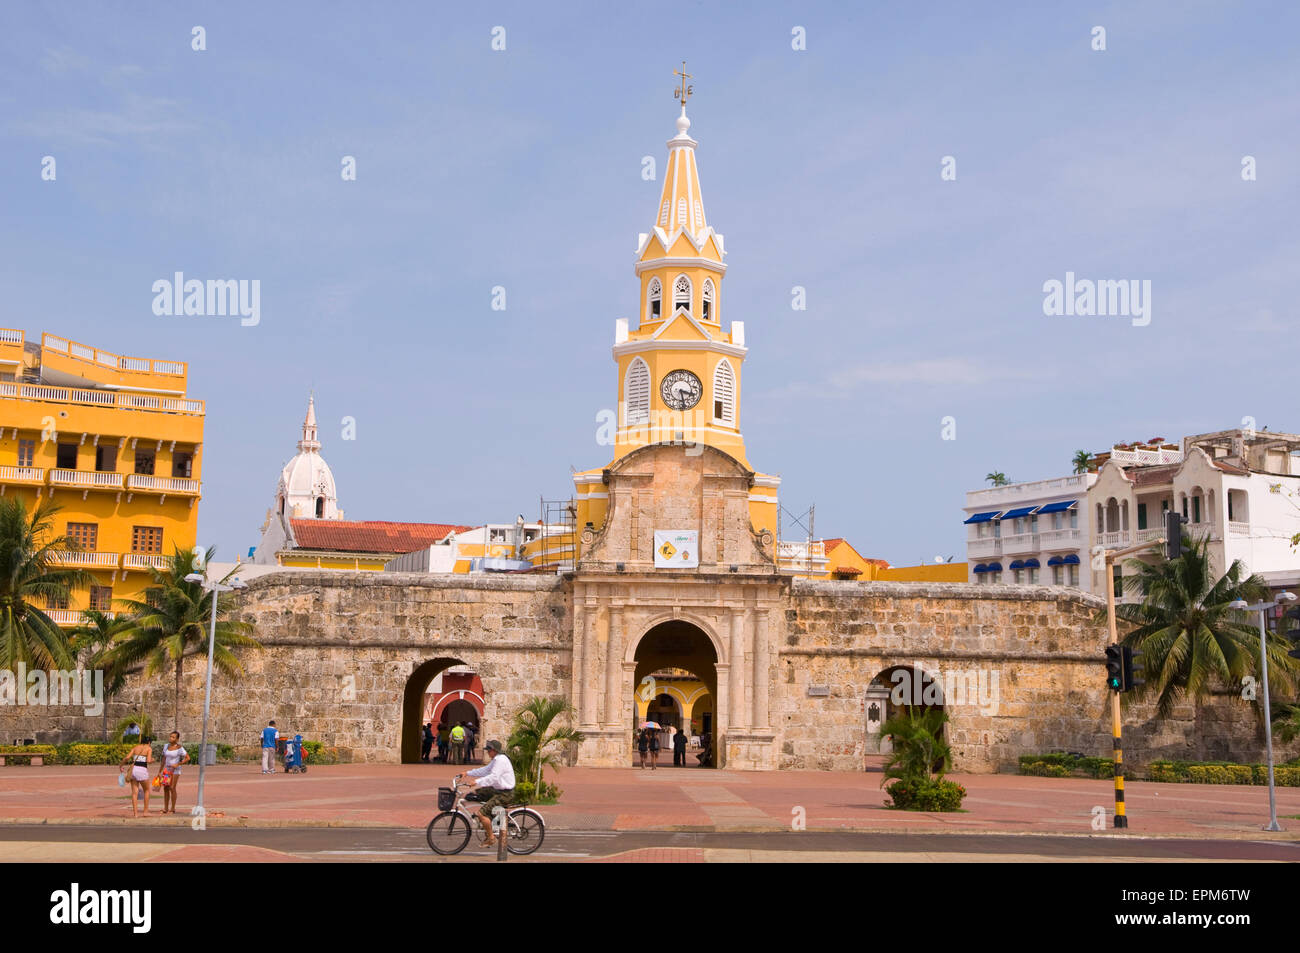 The clock tower gate (Puerta de Reloj) at the entrance to the walled city  of Cartagena, Colombia, South America Stock Photo - Alamy